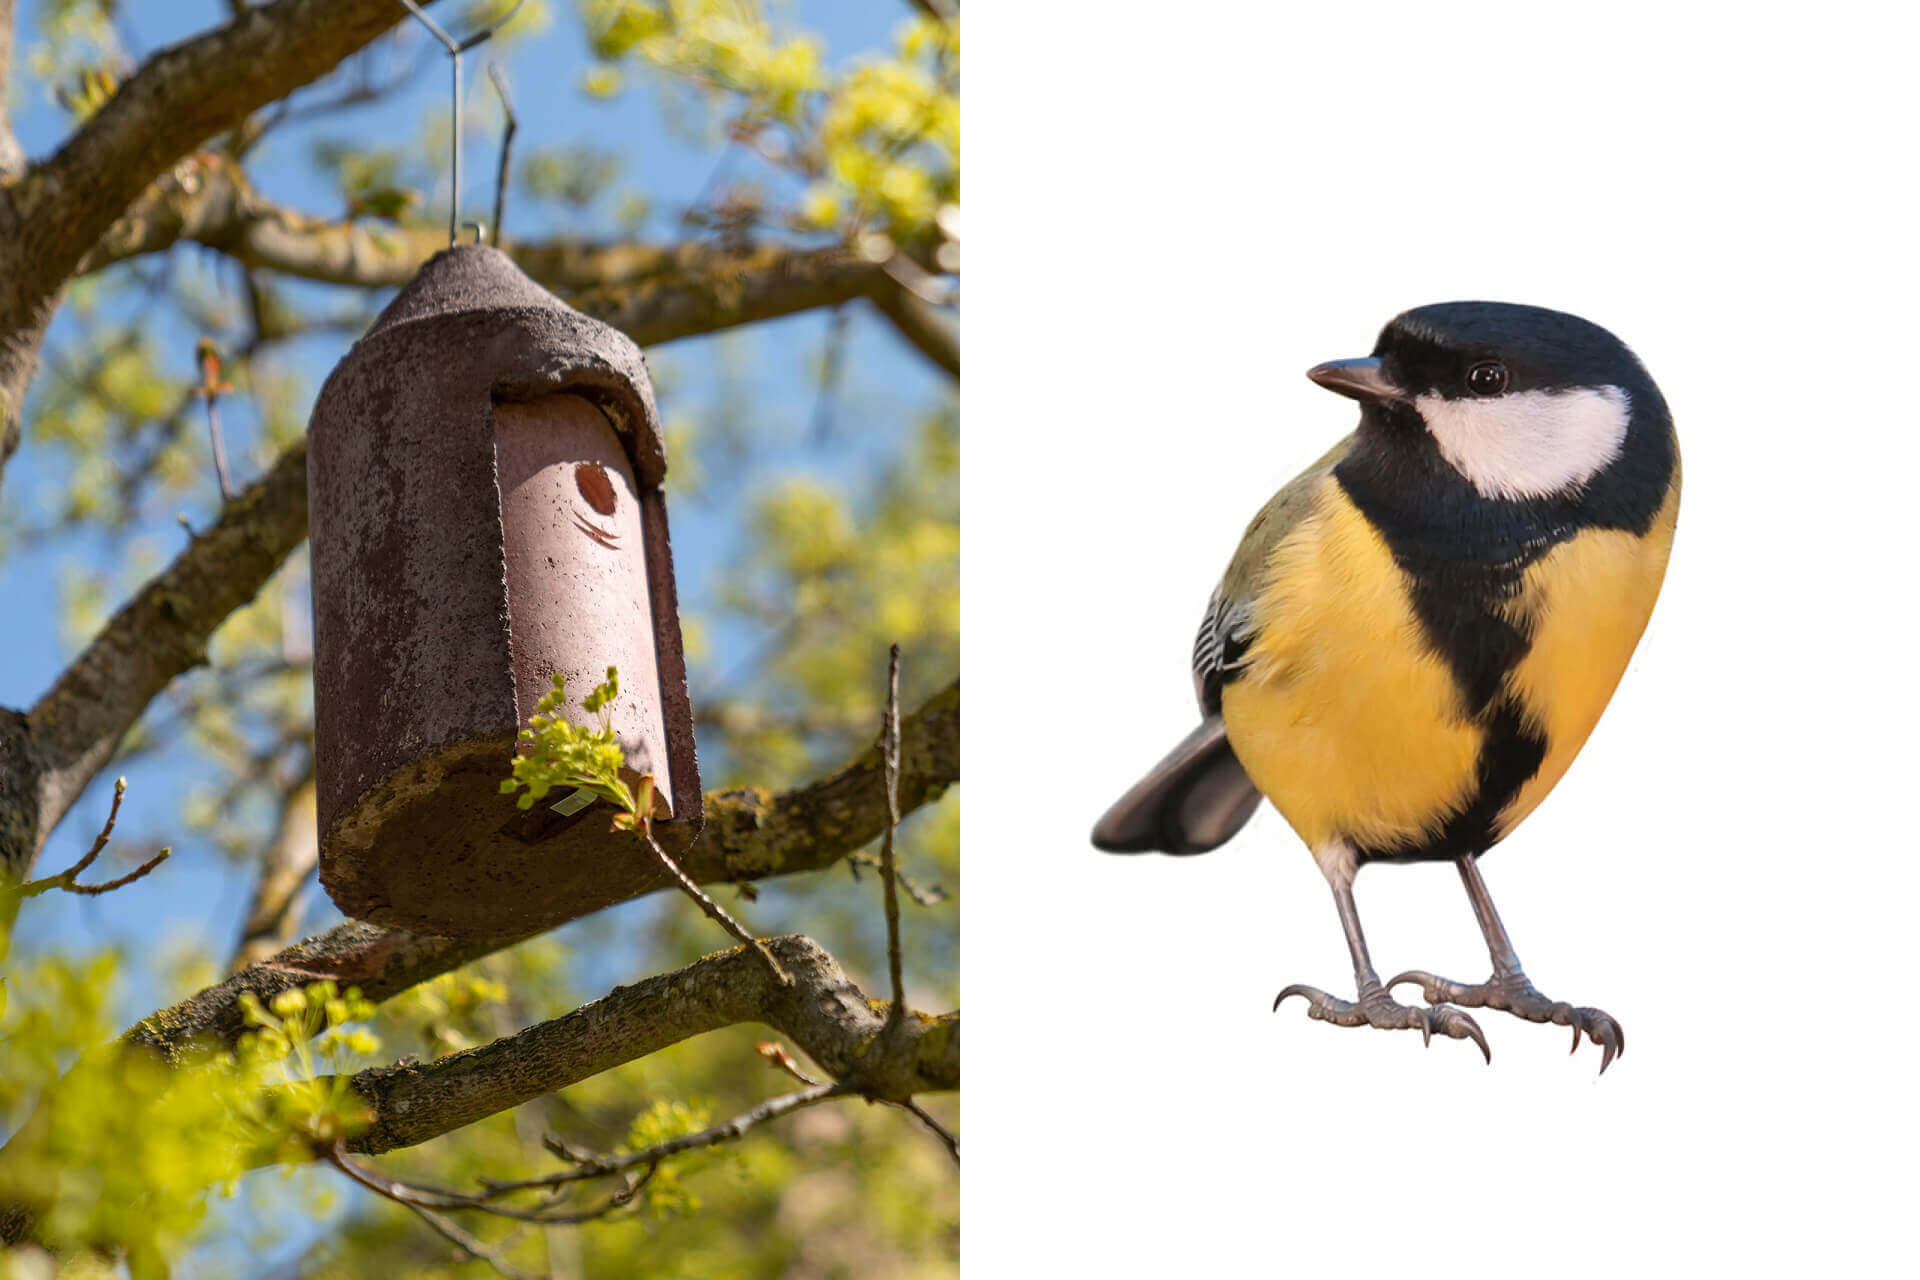 Nesting cavity for tits. Whether they’re great tits, blue tits, marsh tits, coal tits, or crested tits: because this construction is freely suspended in the air using a hanger, the young birds enjoy particularly effective protection against attacks by cats or martens.